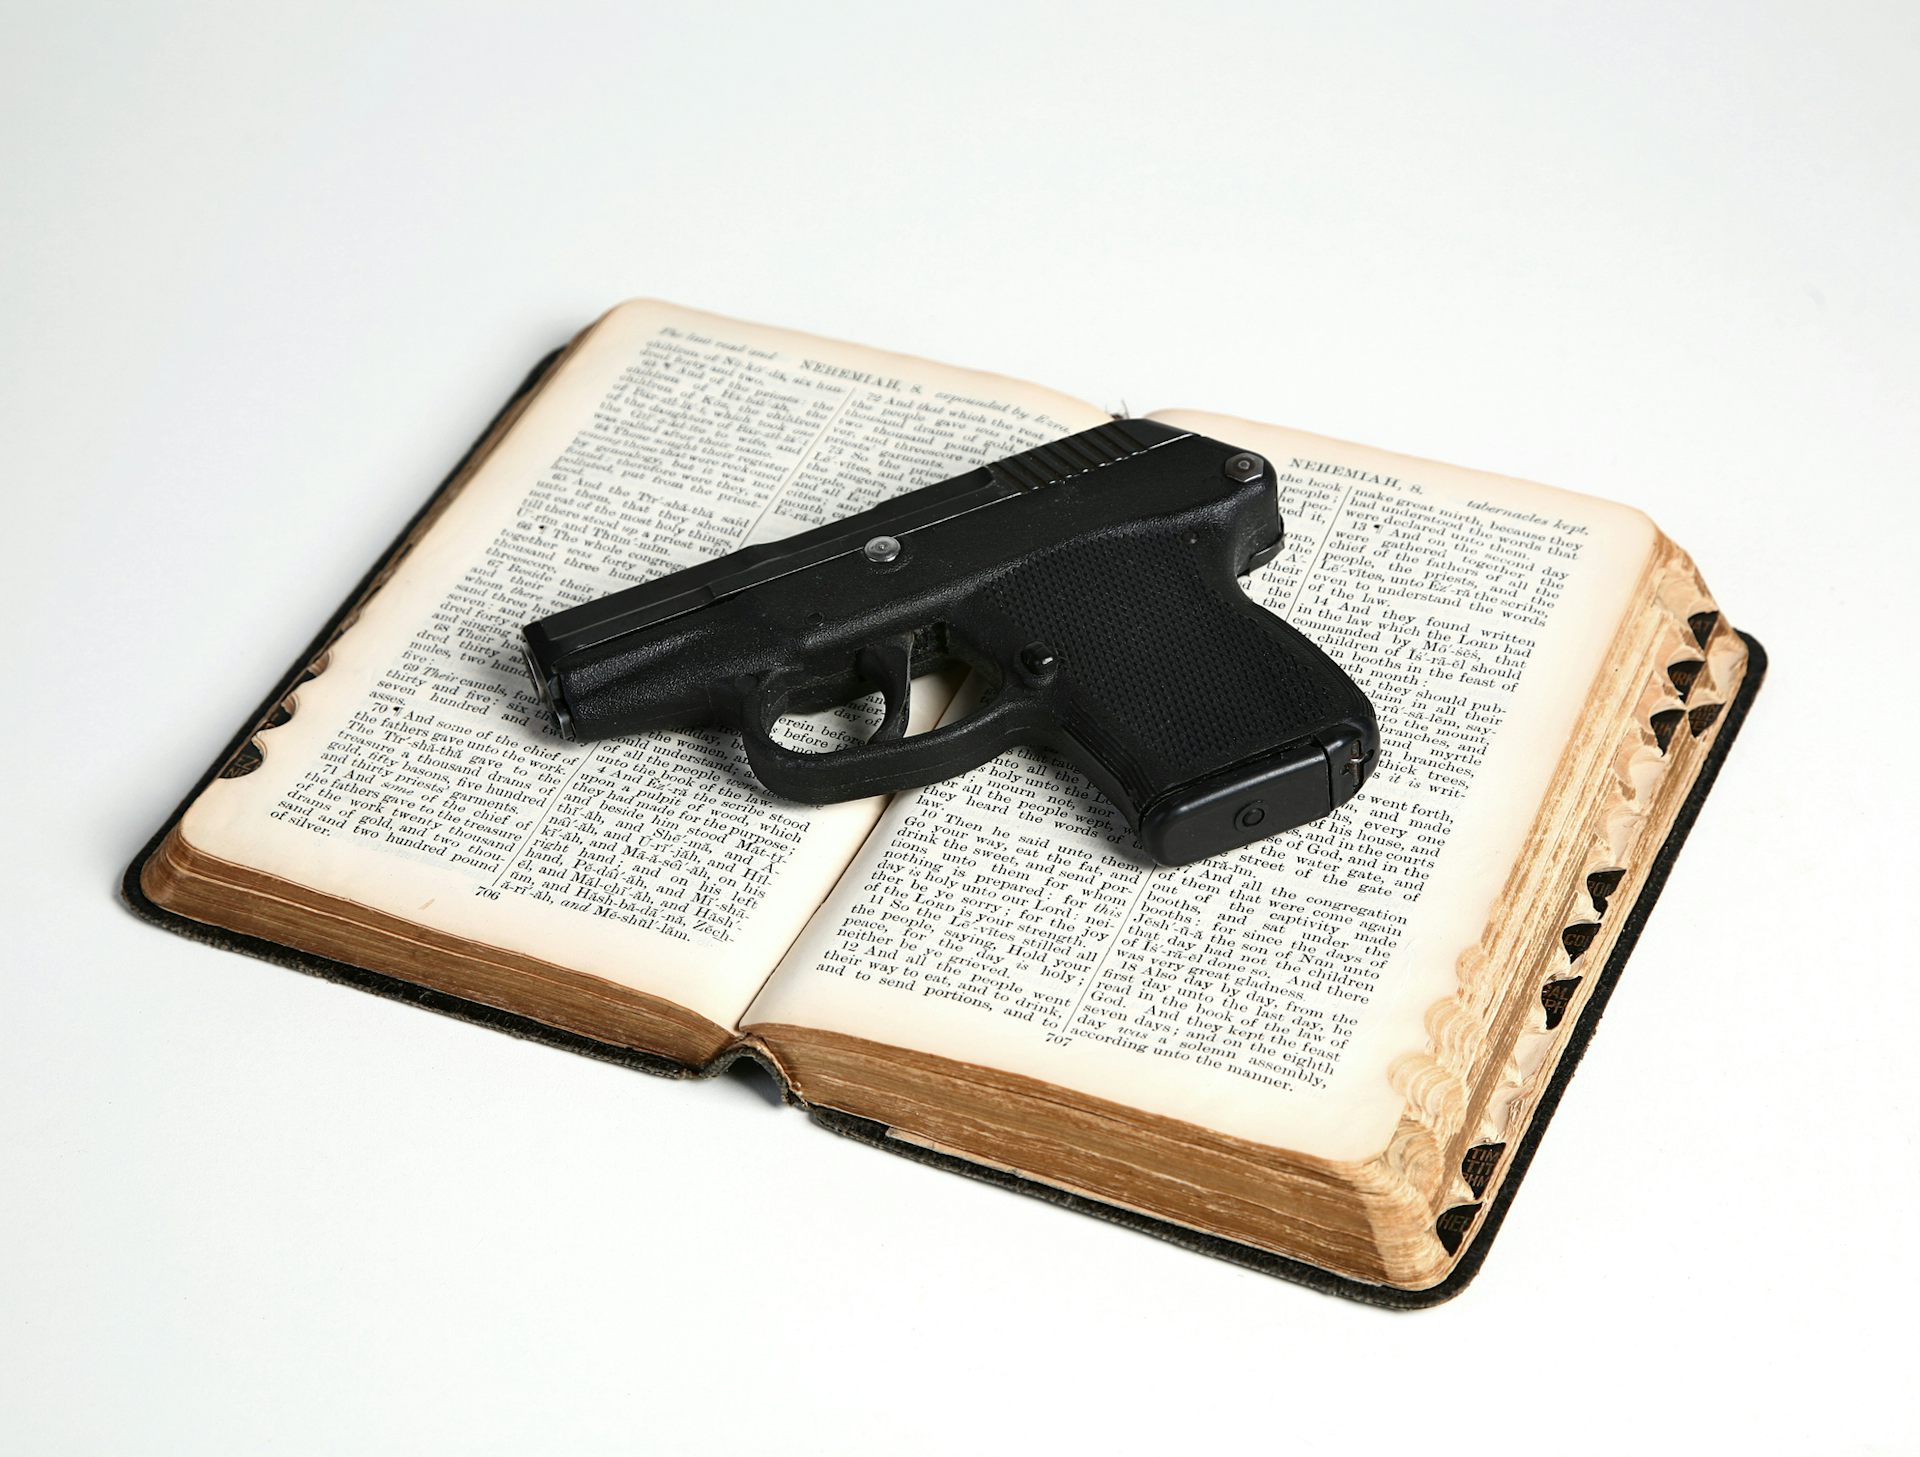 God and Guns Often Go Together in U.S. History – This Course Examines Why